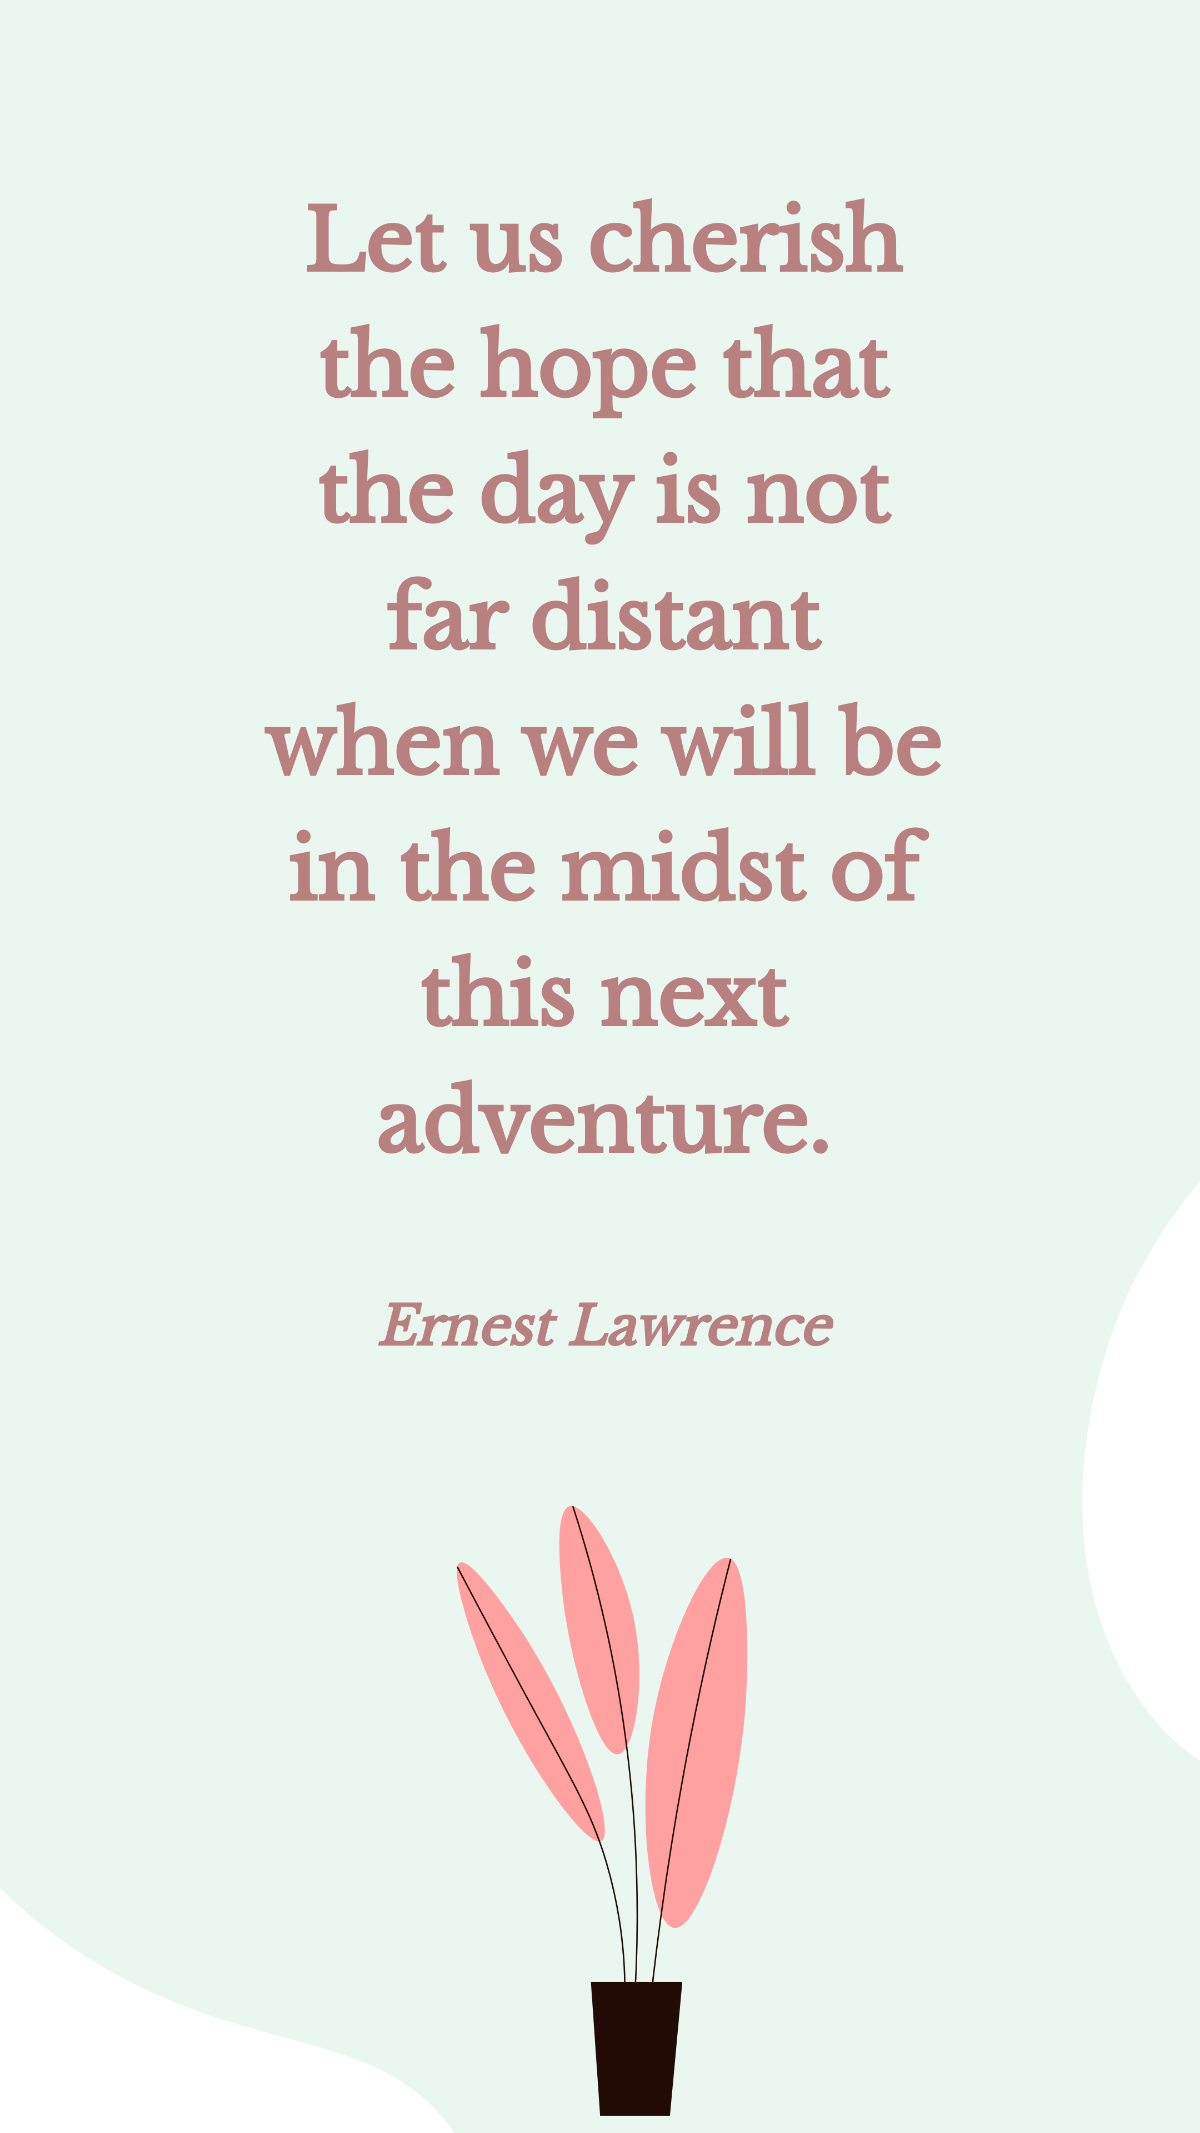 Ernest Lawrence - Let us cherish the hope that the day is not far distant when we will be in the midst of this next adventure. Template